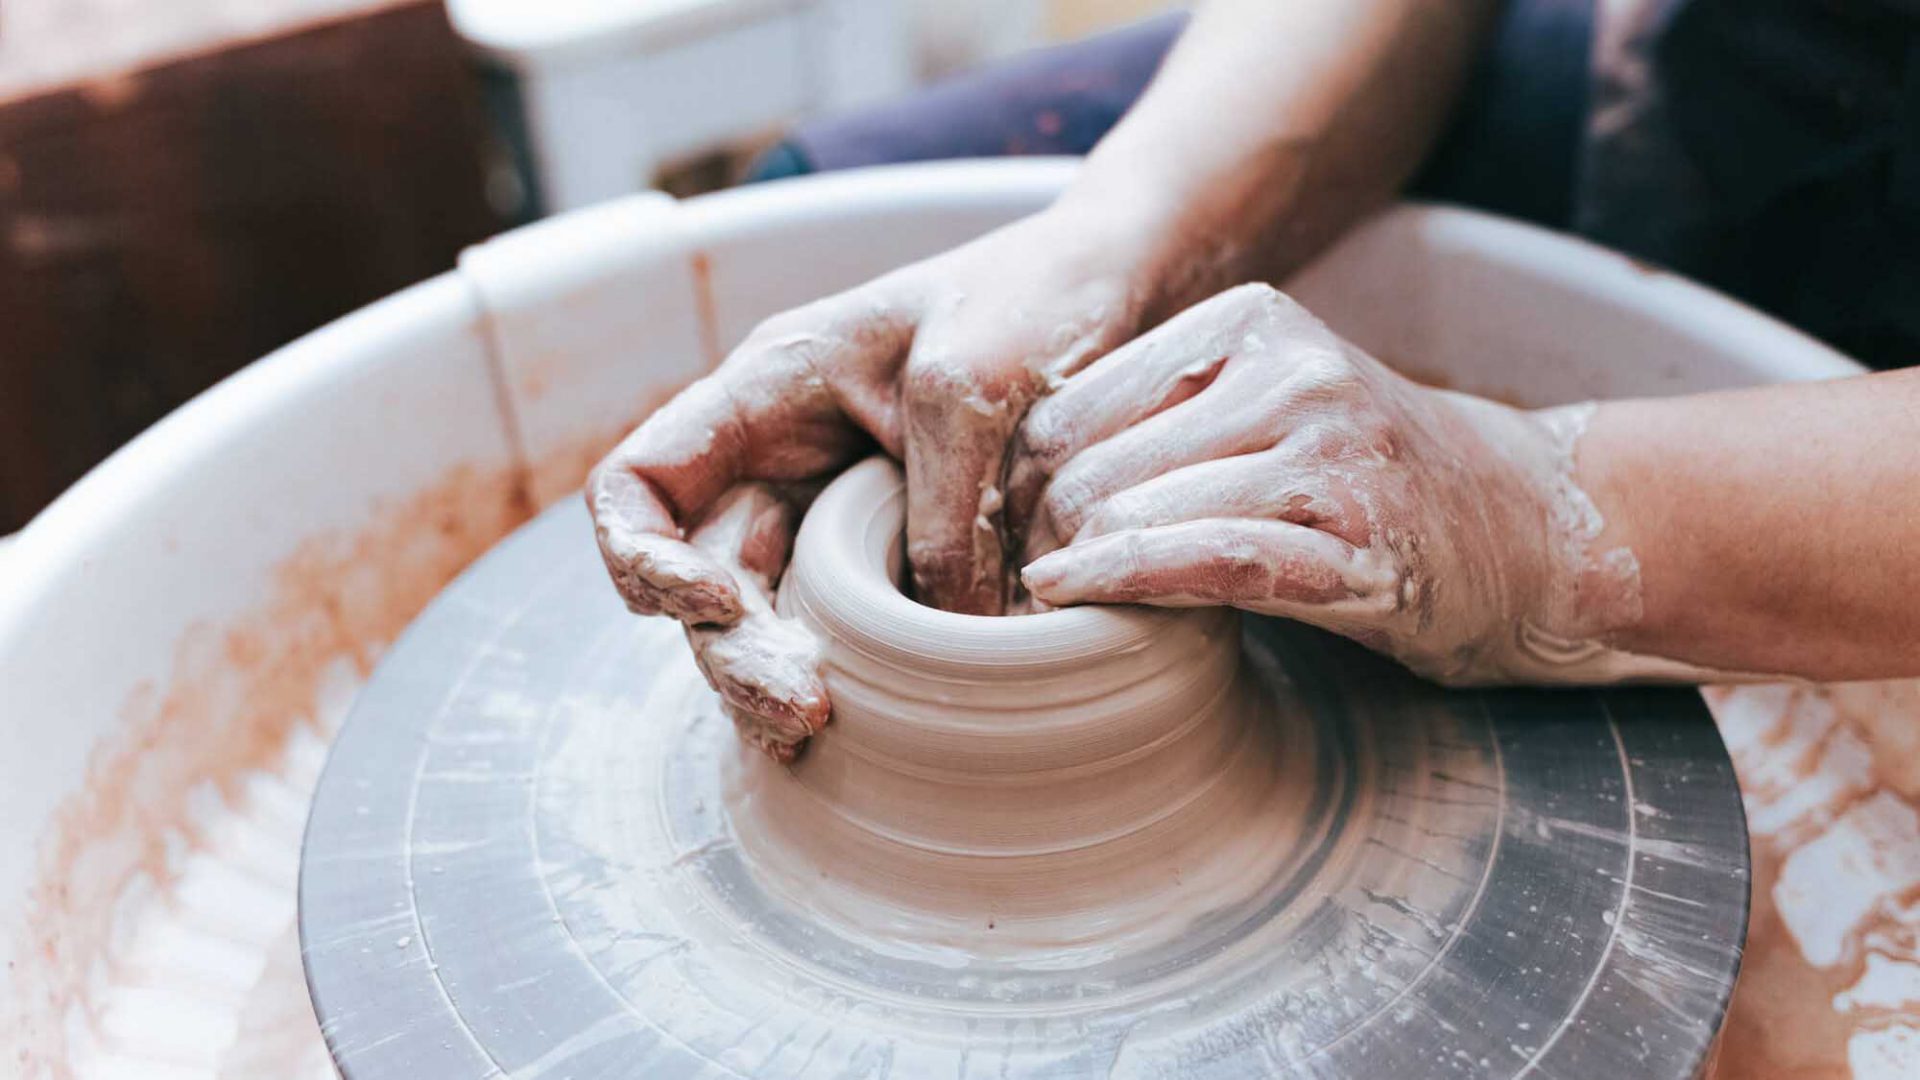 Meet the Insta-makers mastering the craft of pottery - DesignWanted :  DesignWanted